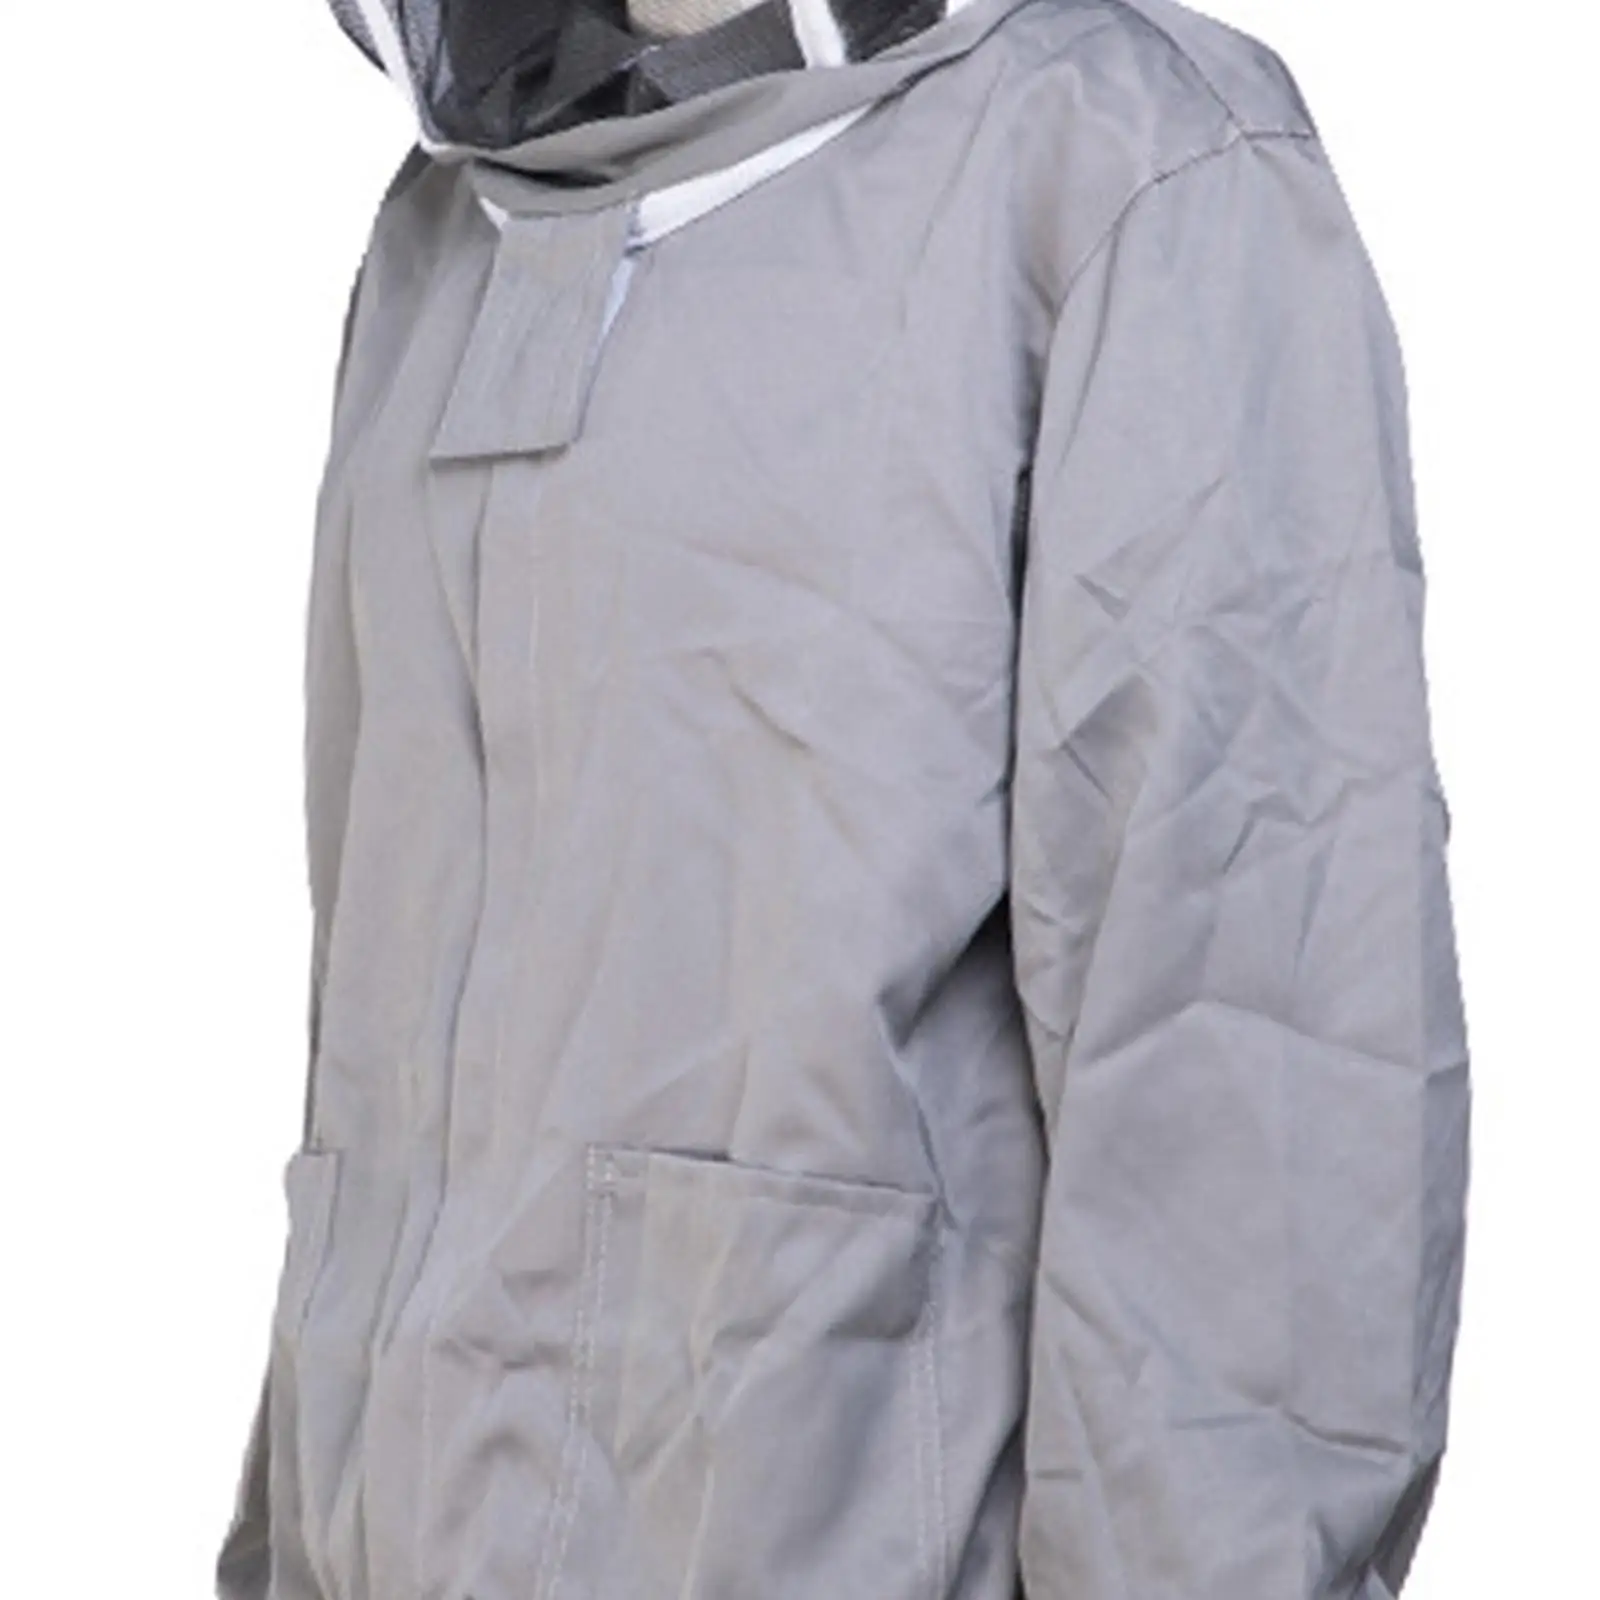 Beekeeper Jacket Breathable Professional with Fencing Veil Hood Premium with